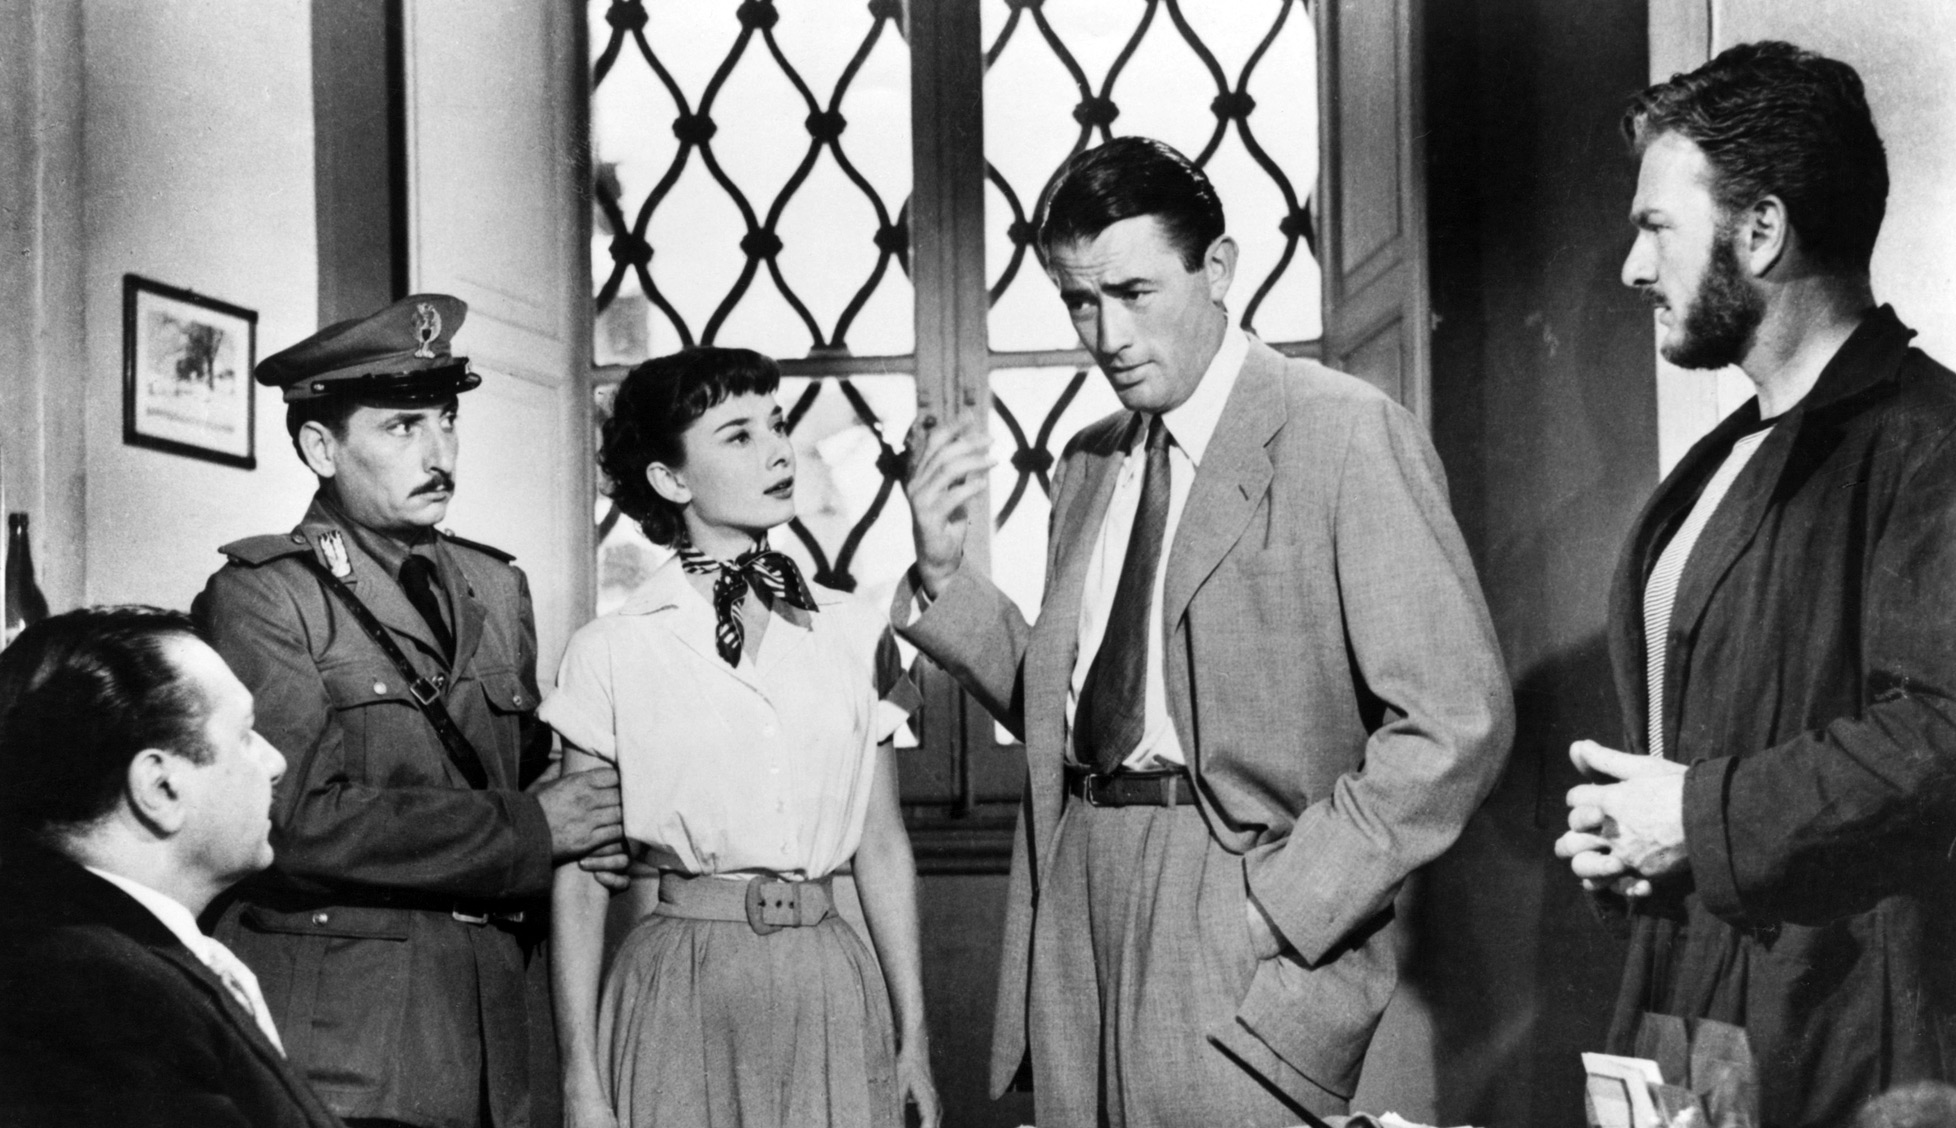 Audrey Hepburn and Gregory Peck in "Roman Holiday"